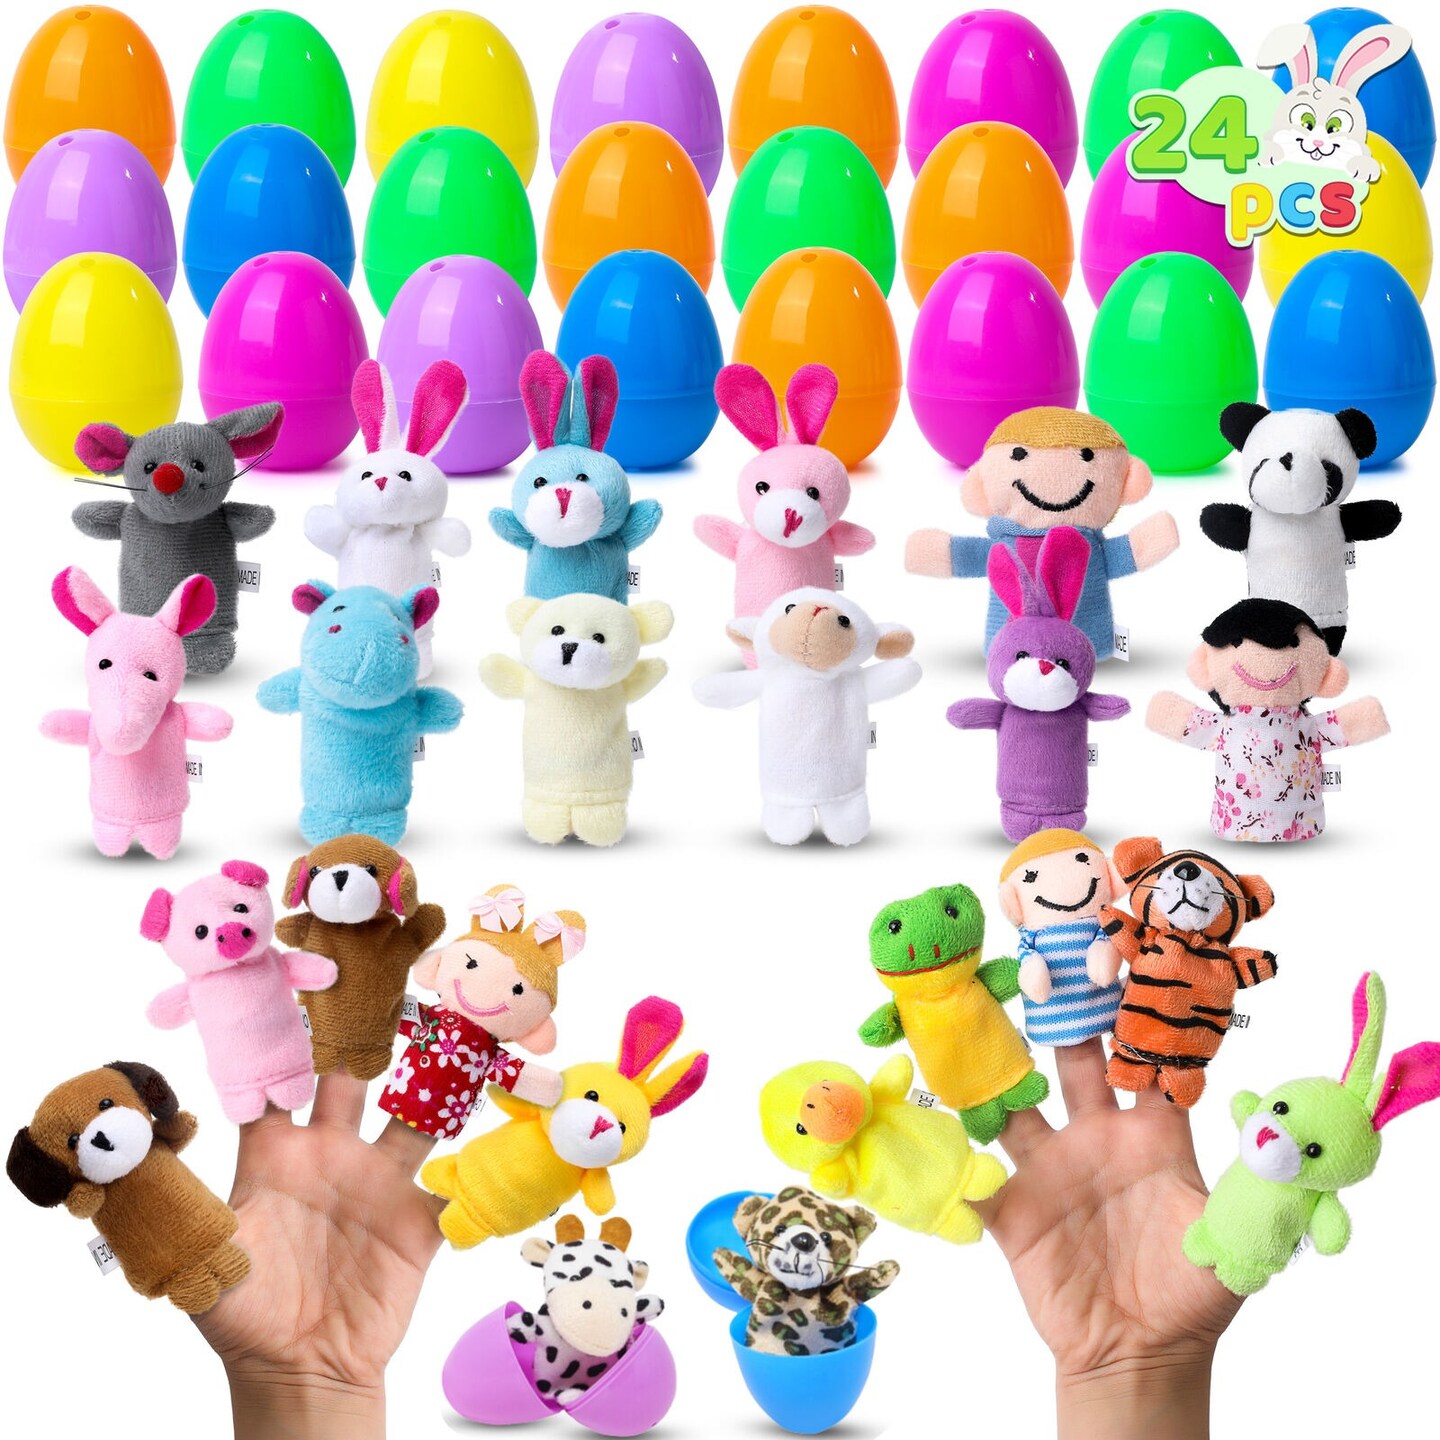 24 Pcs Easter Eggs Filled with Finger Puppets Prefilled Egg with Cartoon Animal